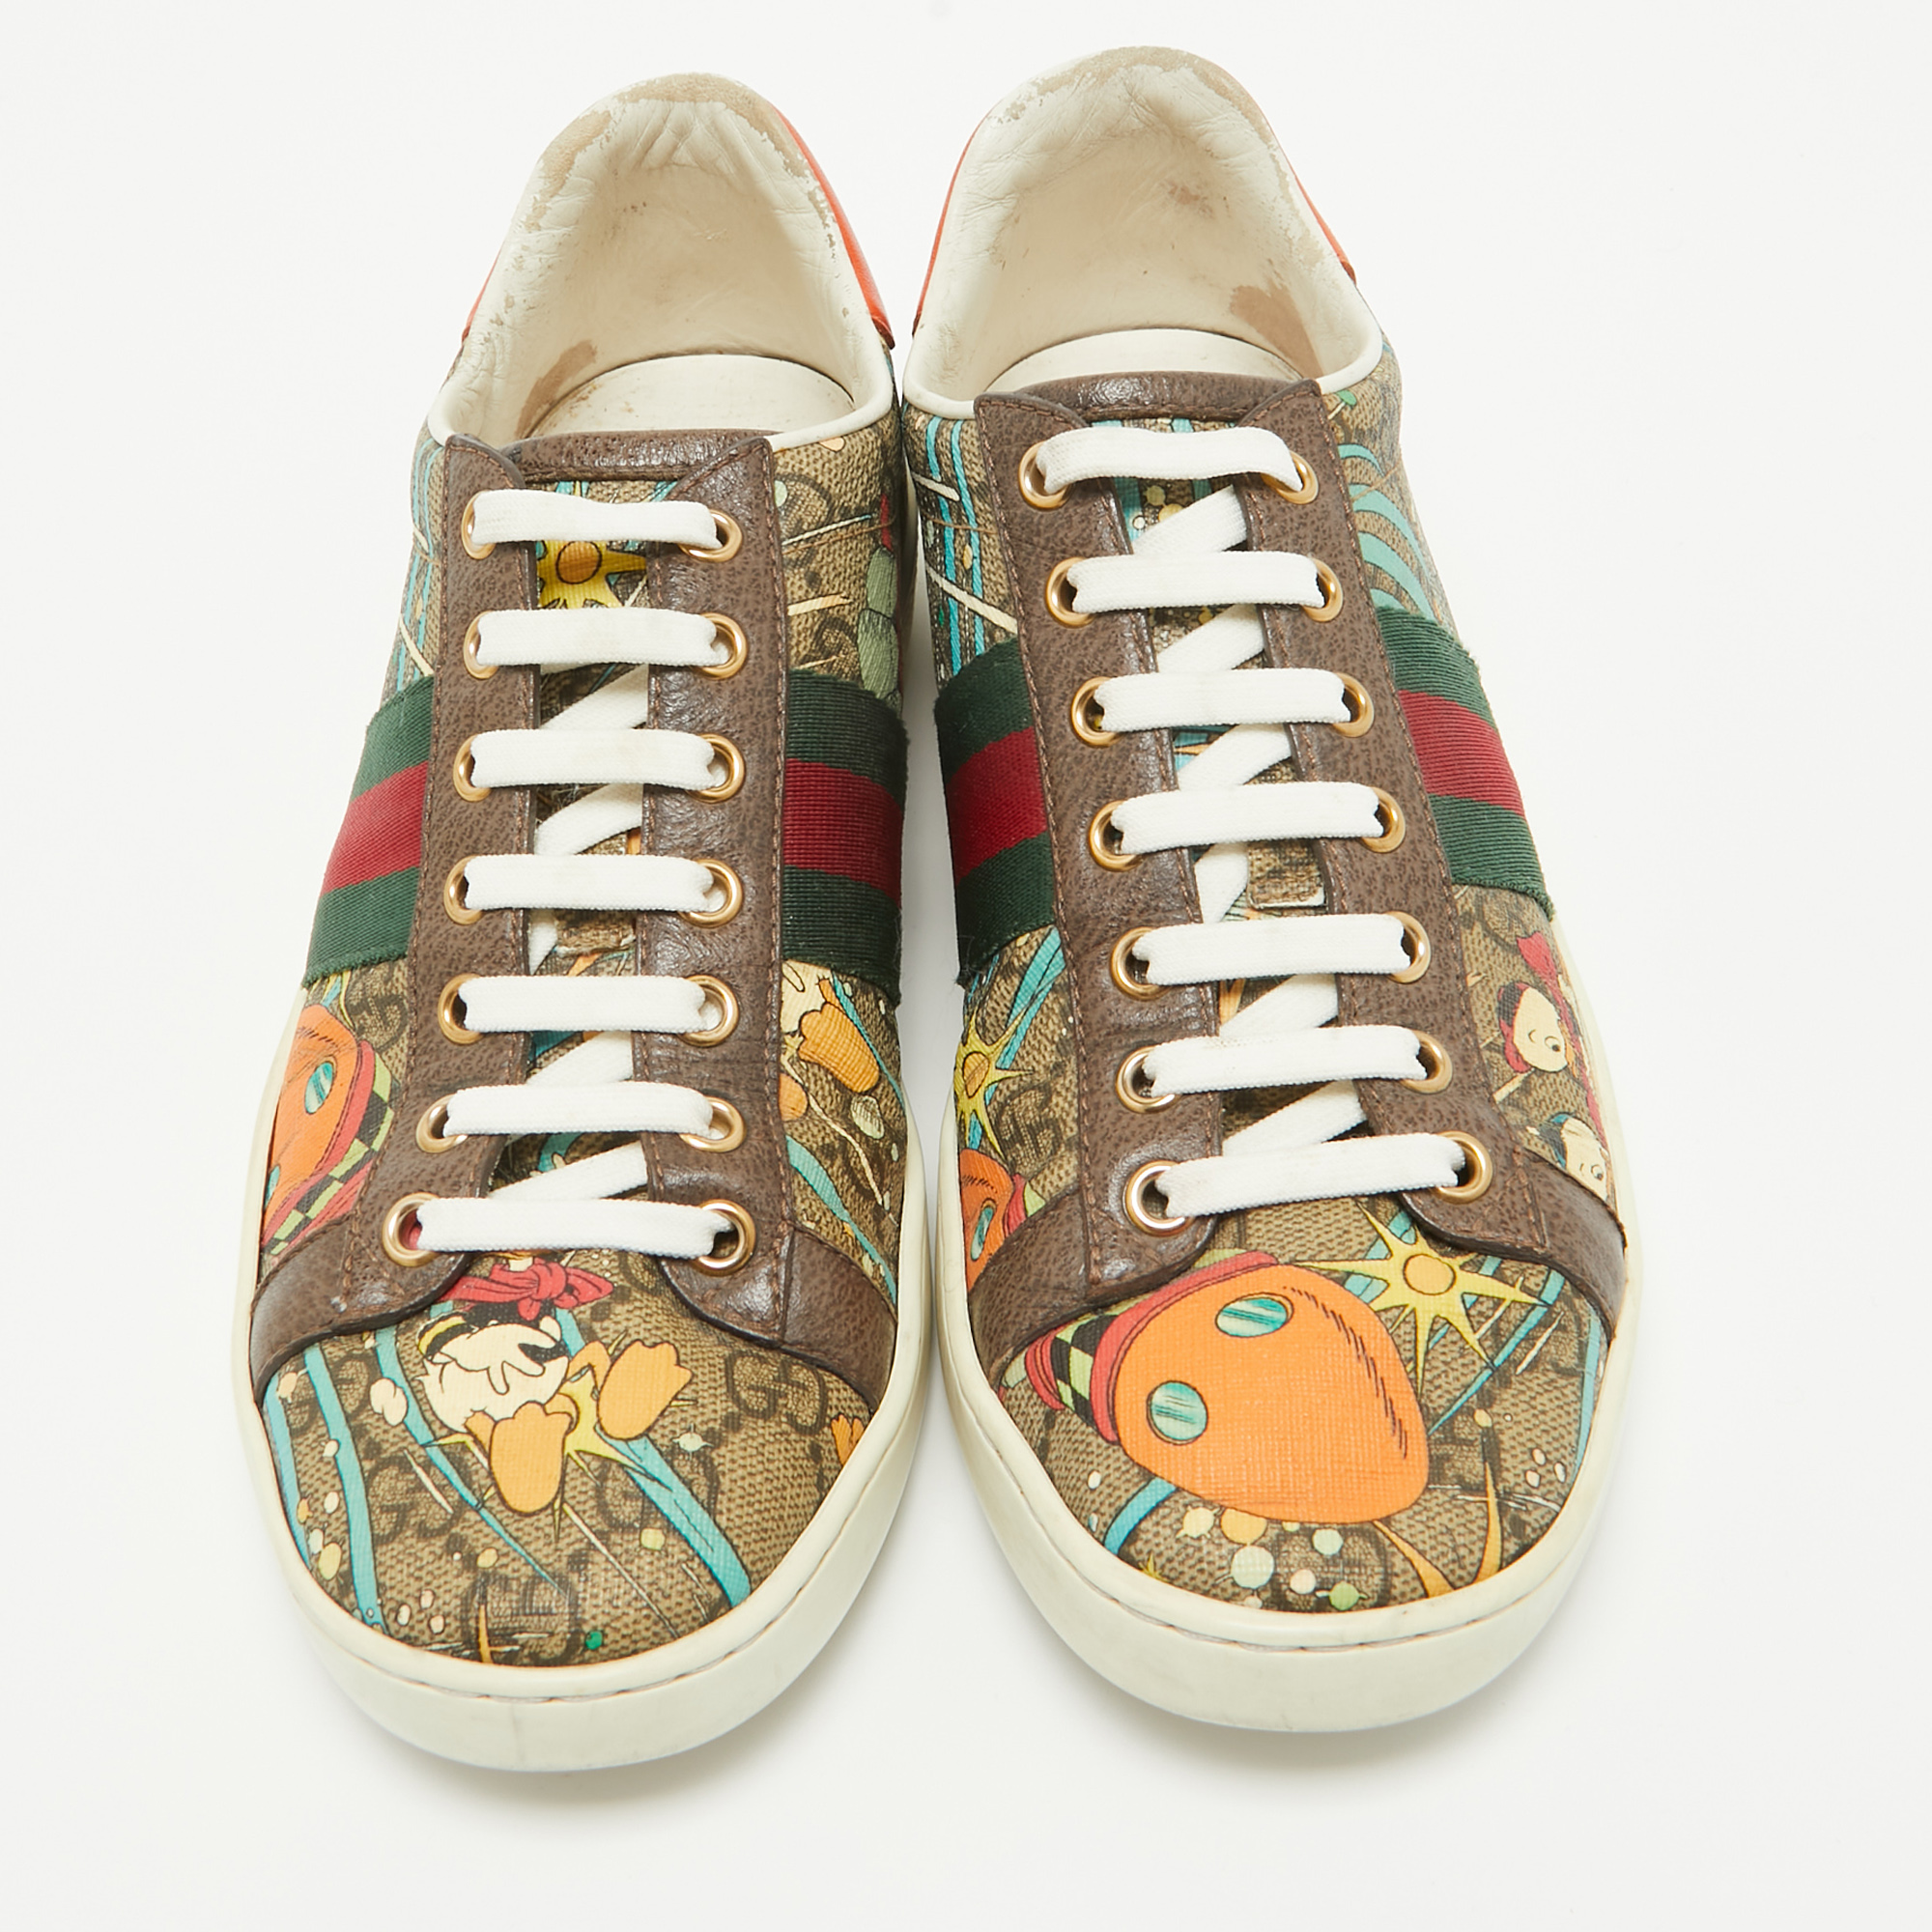 Gucci Multicolor Leather And Canvas Graphic Print Ace Sneakers Size 37